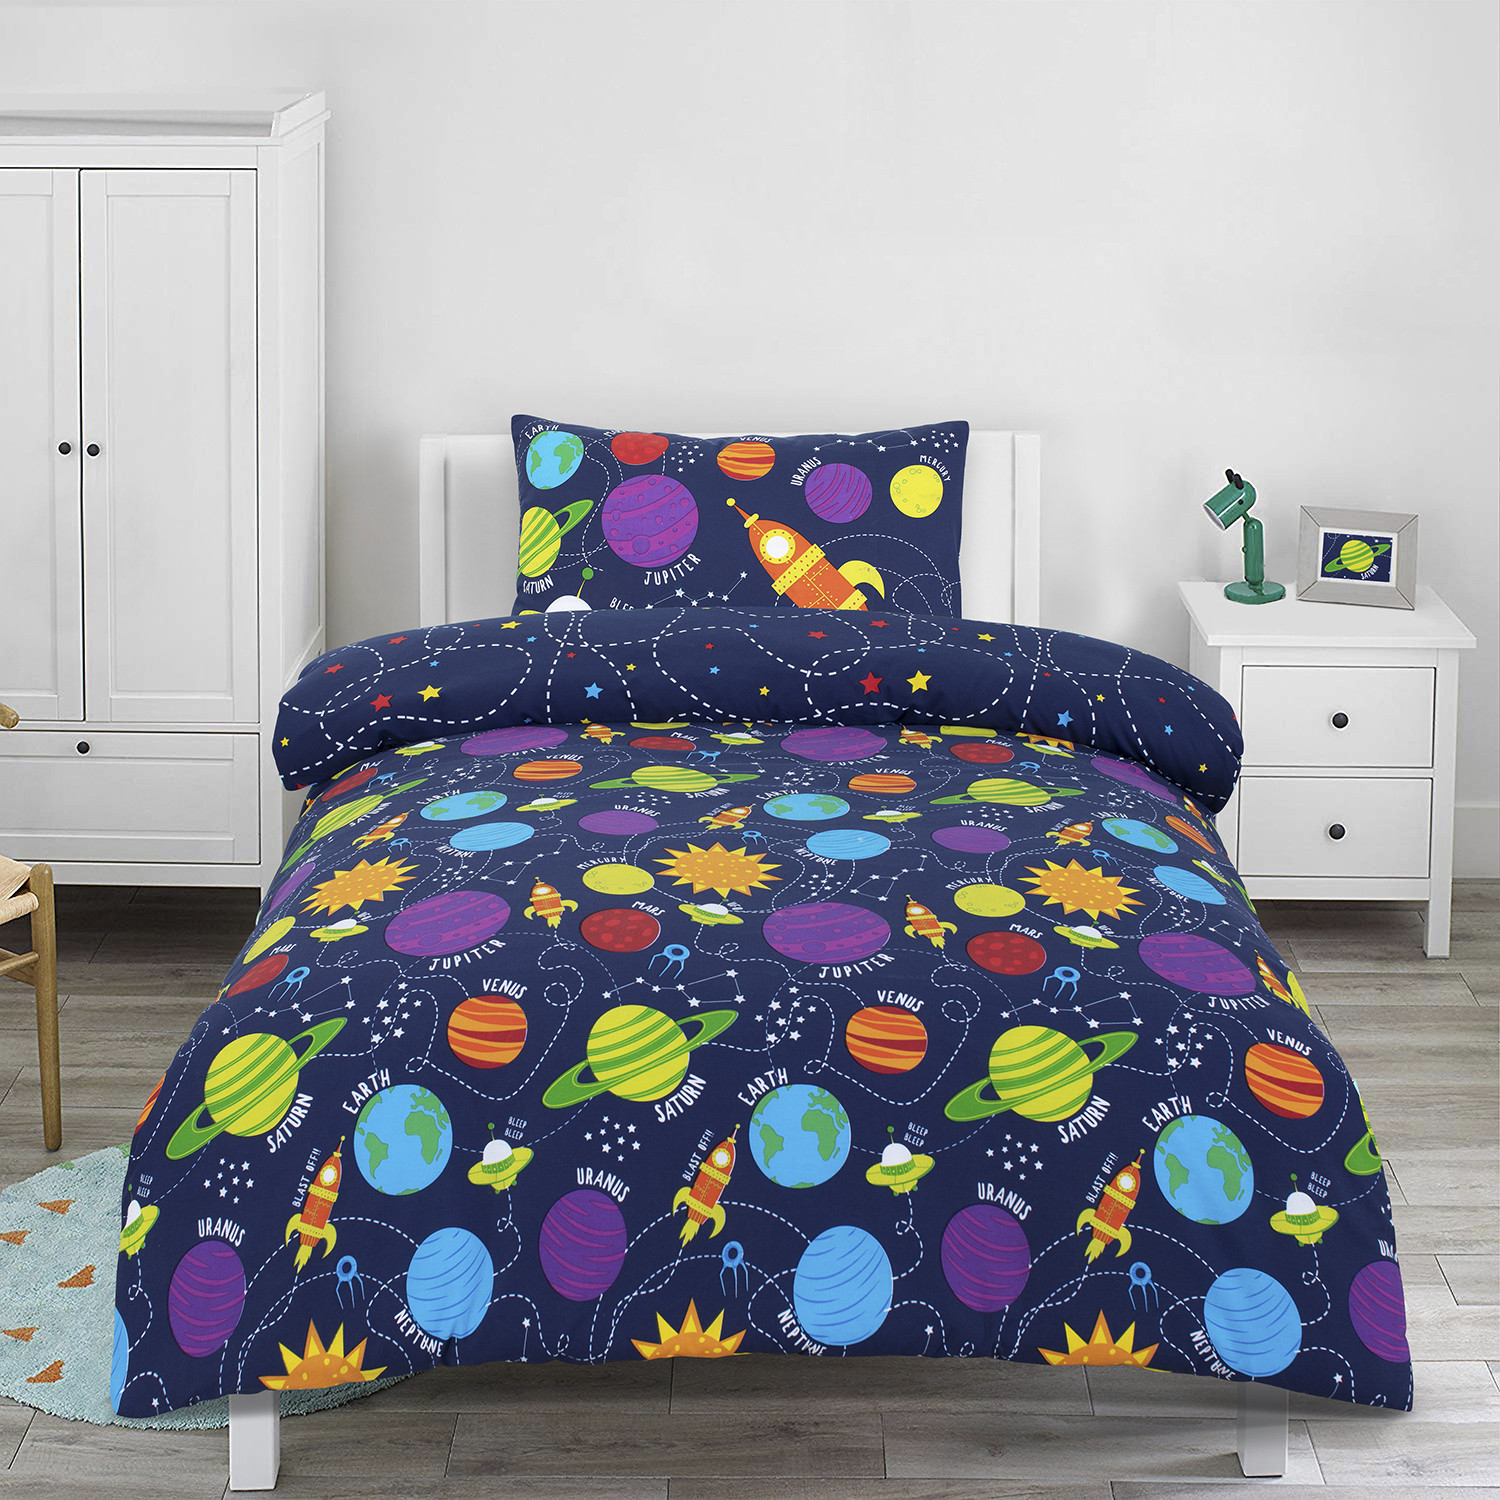 Sleep in Space Single Glow In The Dark Duvet Cover and Pillowcase Set Image 2